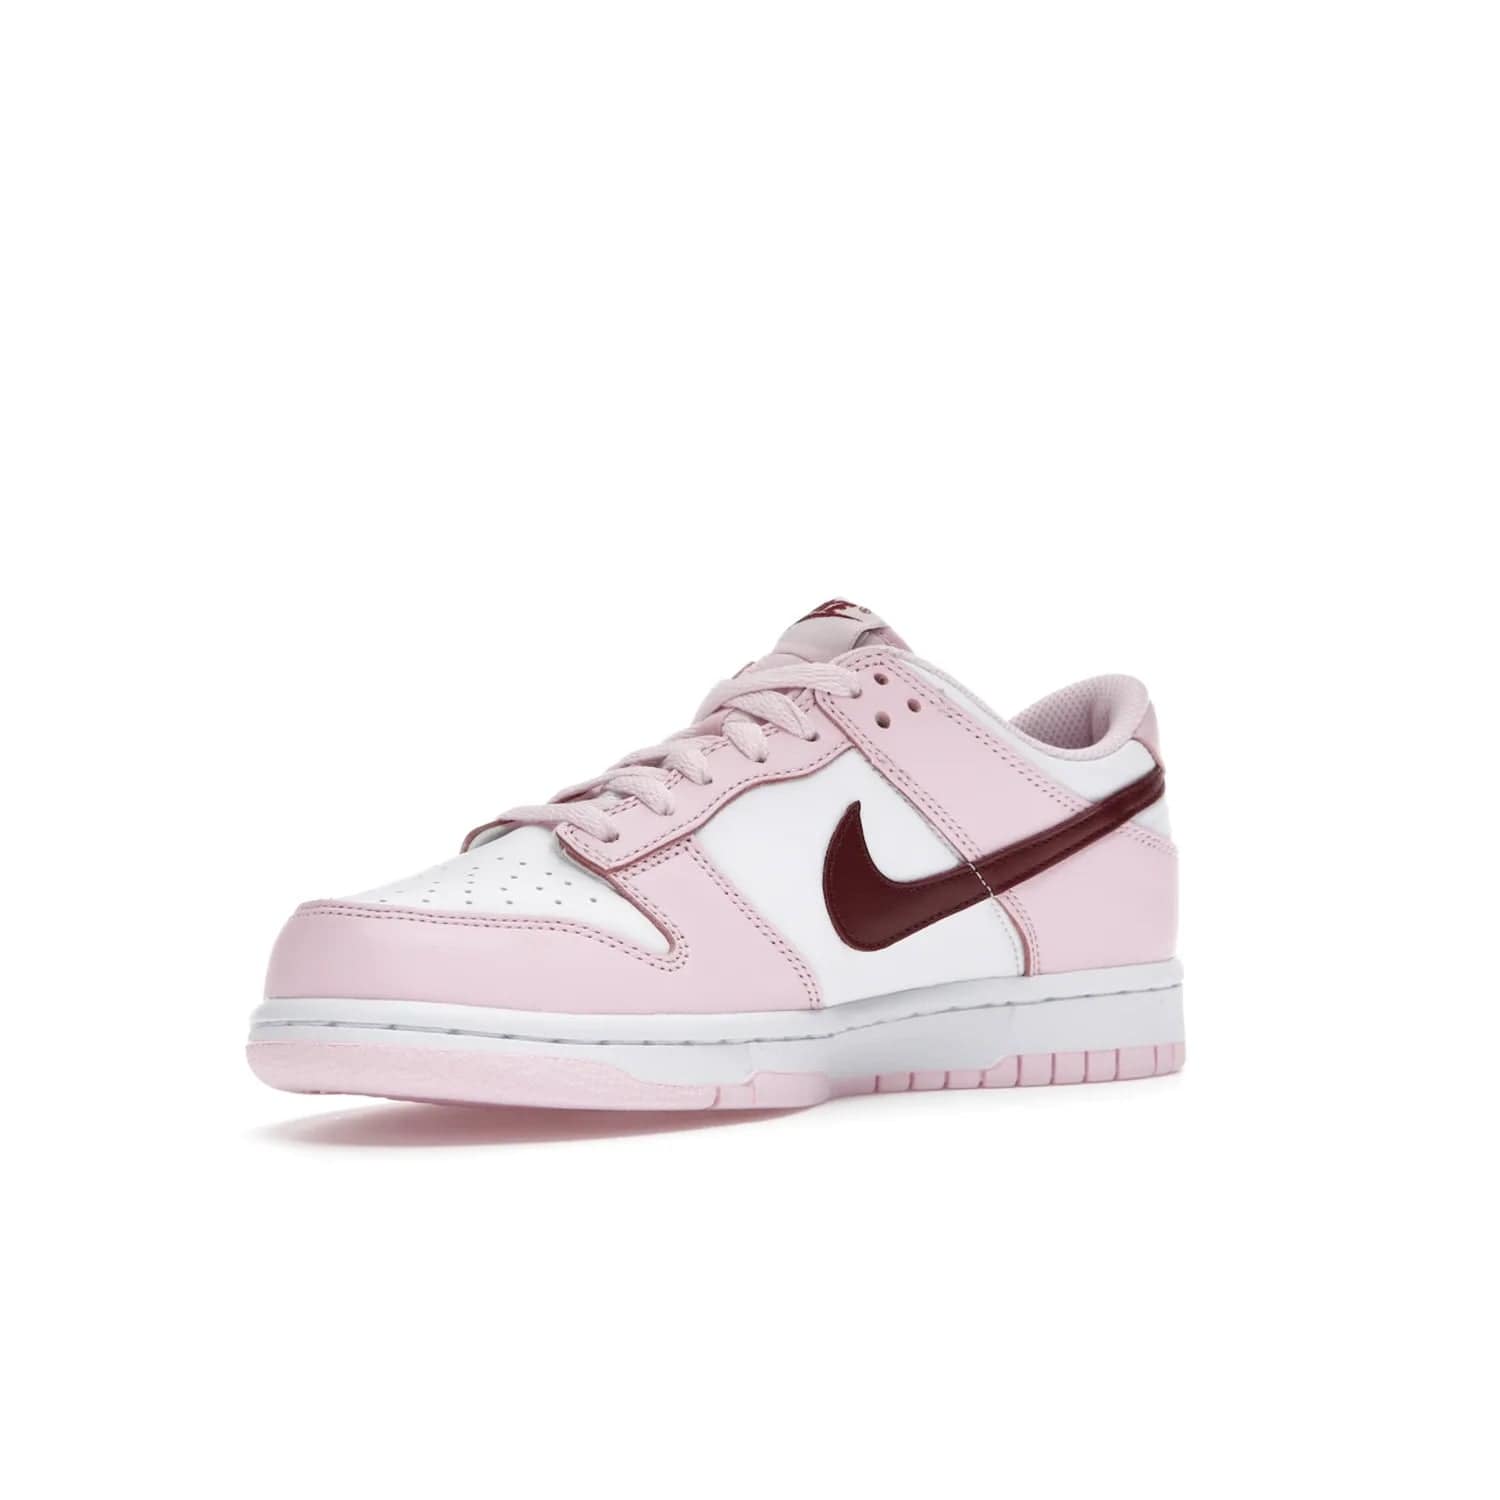 Nike Dunk Low Pink Foam Red White (GS) - Image 15 - Only at www.BallersClubKickz.com - #
Introducing the daring and stylish Nike Dunk Low Pink Foam Red White (GS) sneaker for grade schoolers. White leather with pink overlays and Dark Beetroot accents, classic Nike Dunk midsole and pink outsole. Released August 2021 for $85.